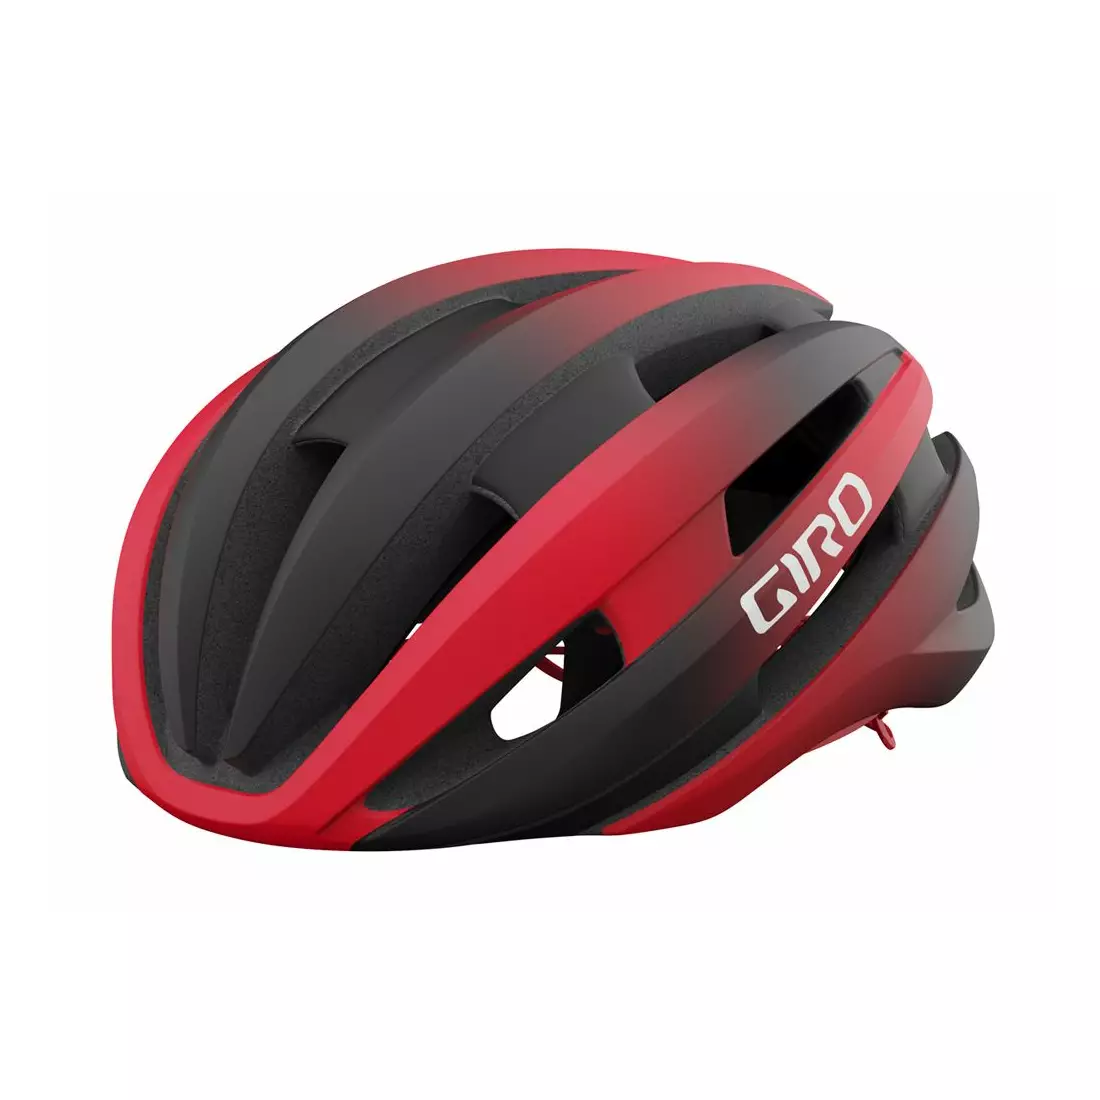 GIRO Fahrradhelm SYNTHE INTEGRATED MIPS II matte black bright red GR-7130770